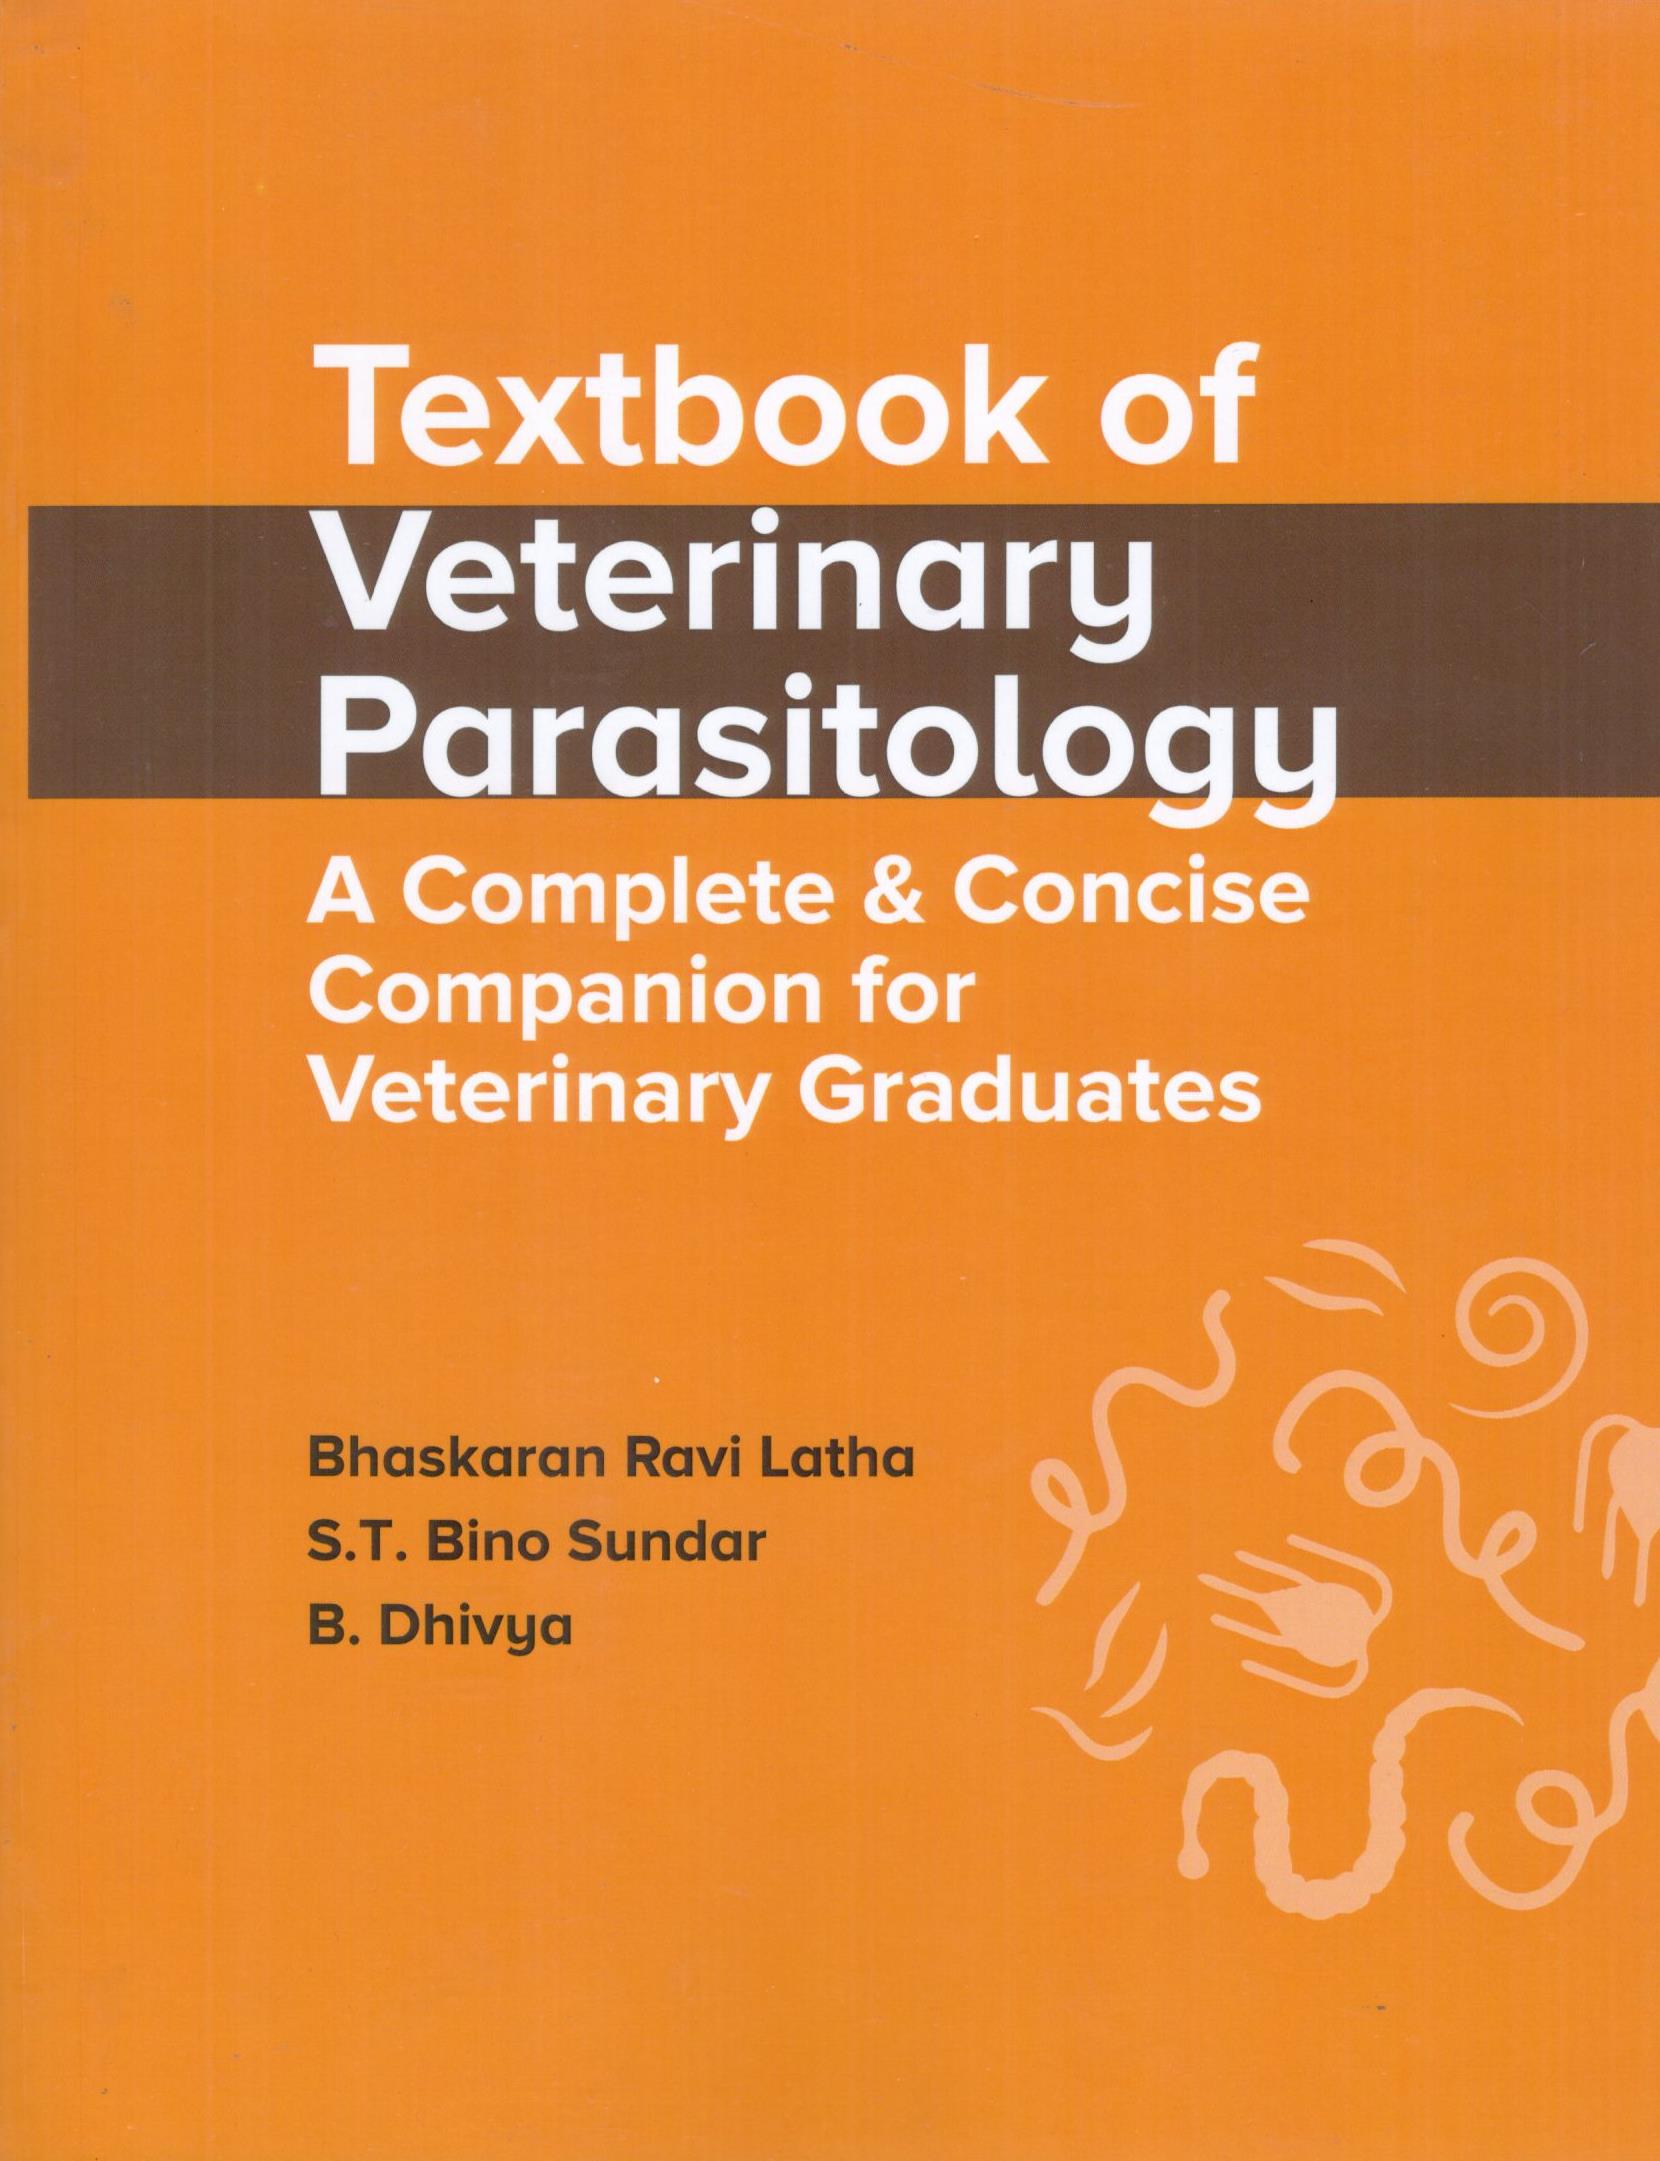 Textbook of Veterinary Parasitology A Complete and Concise Companion for Veterinary Graduates